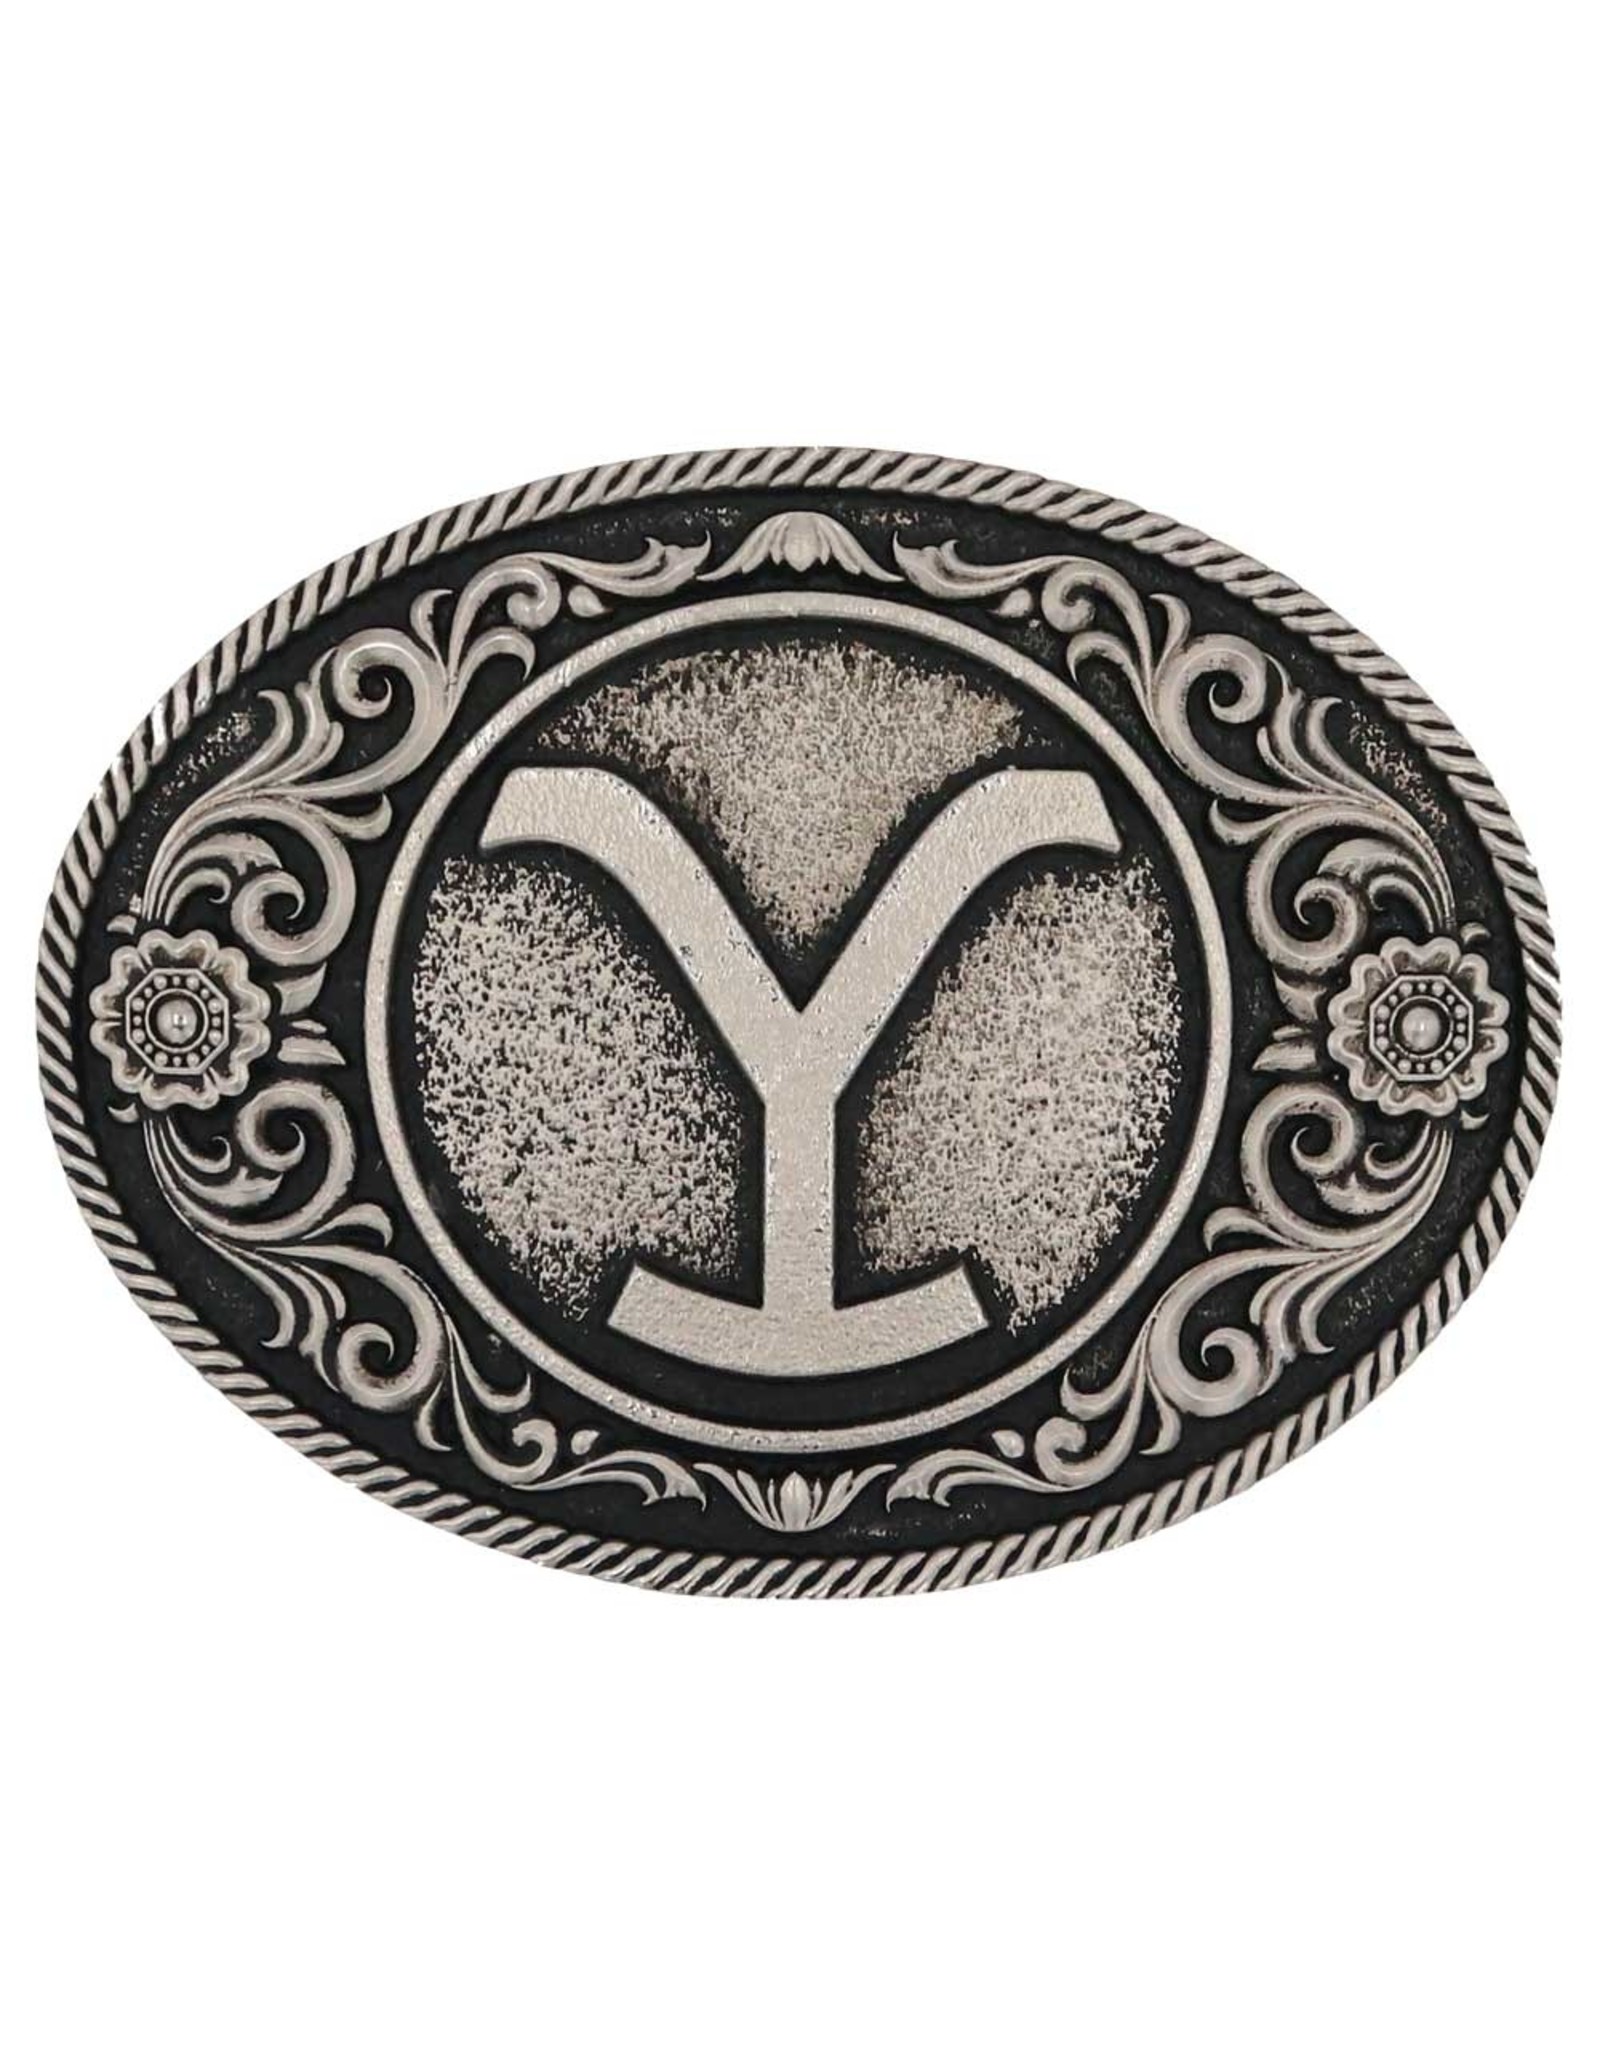 Attitude Jewelry Yellowstone Dutton Ranch Floral Brand A914YEL Belt Buckle